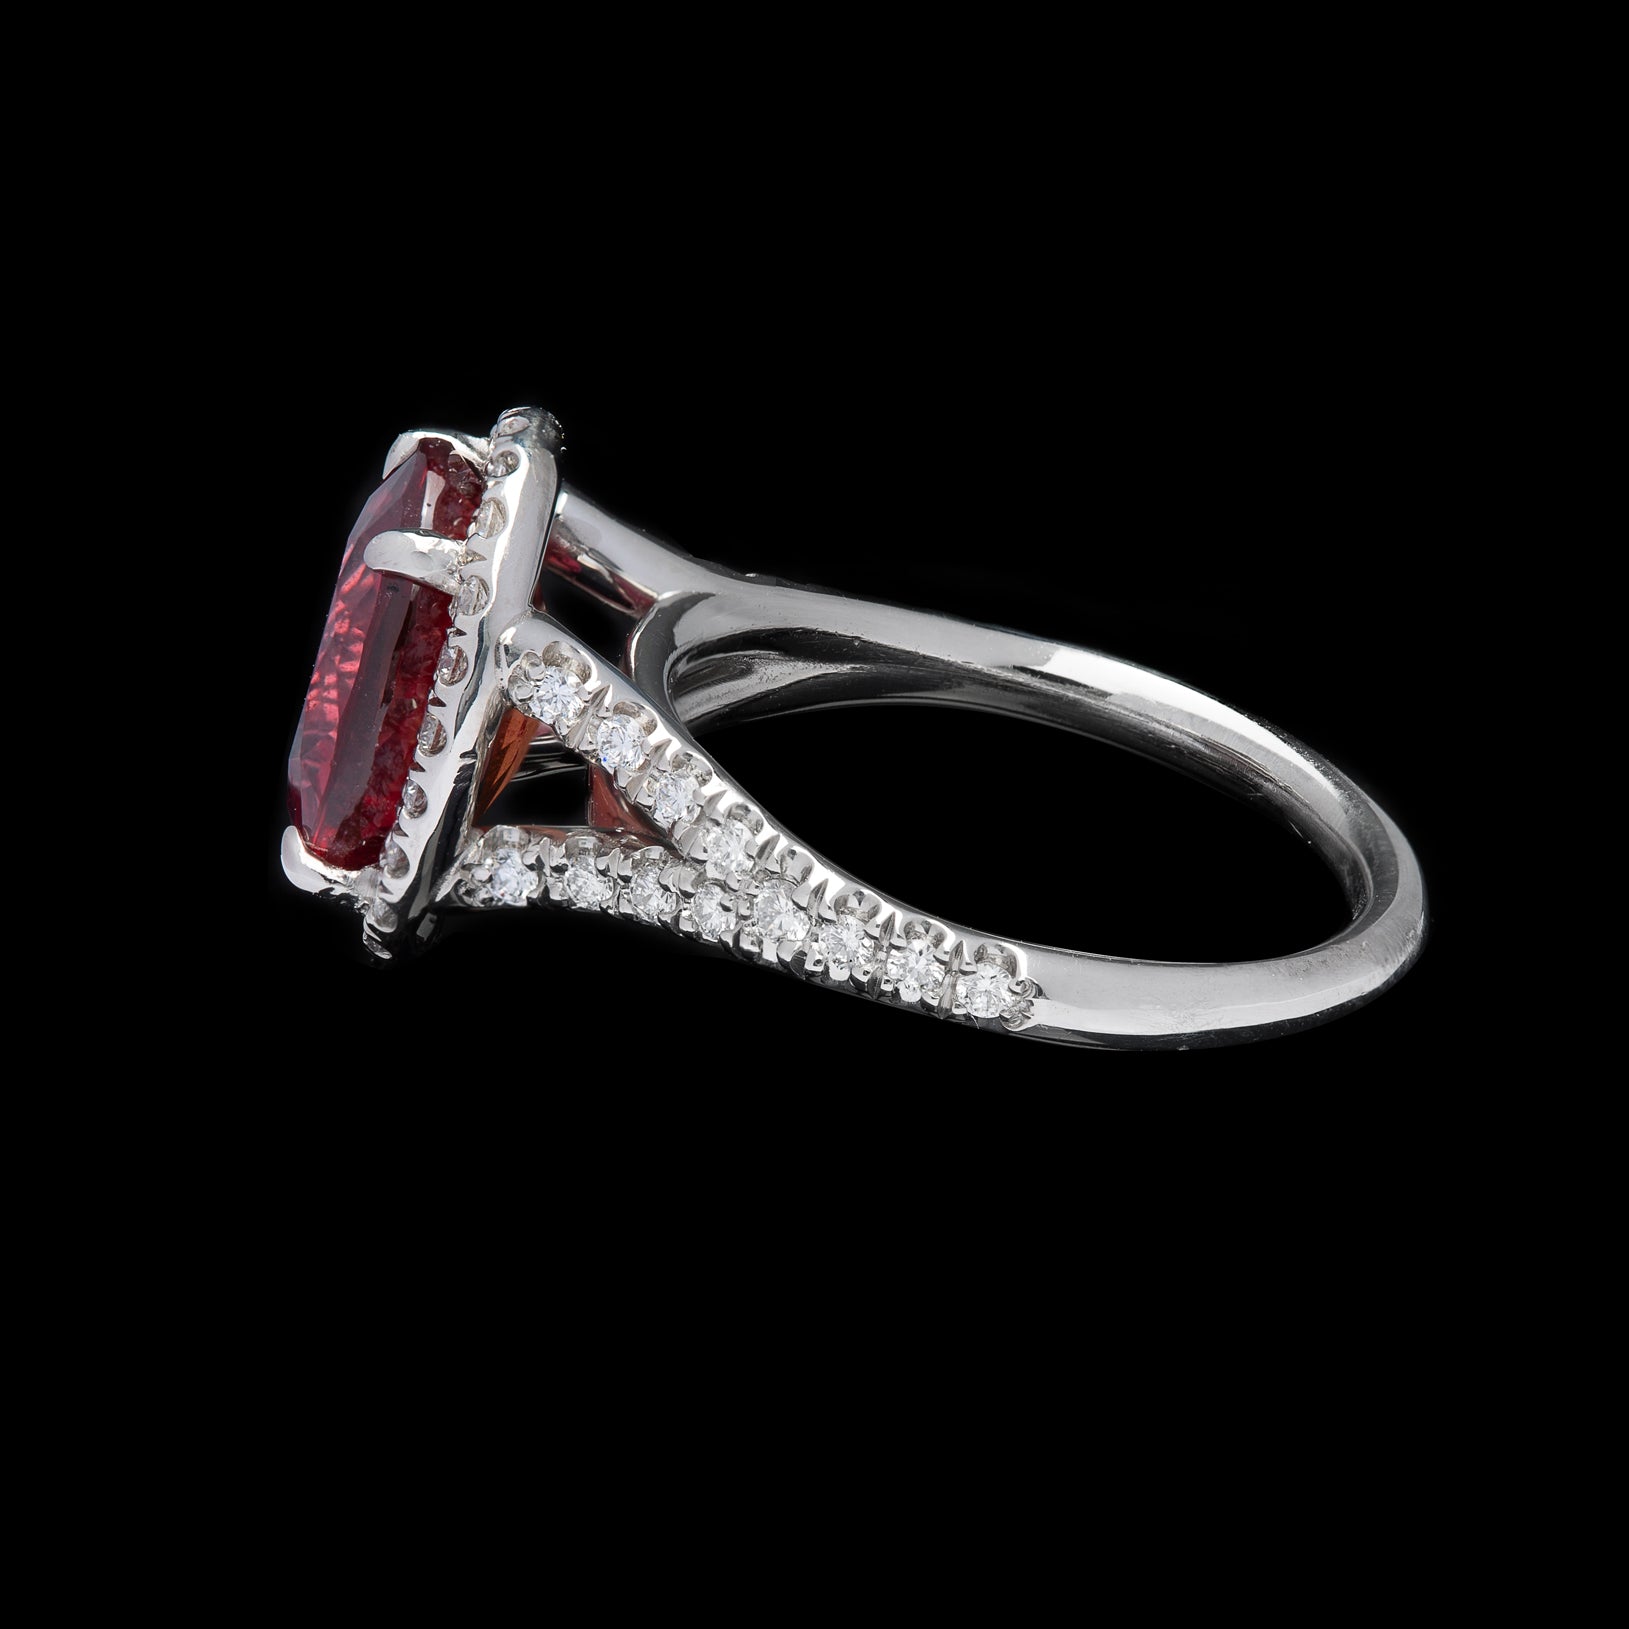 1.00ct Natural Pigeon Blood Ruby and Marquise Diamond Ring | HN JEWELRY